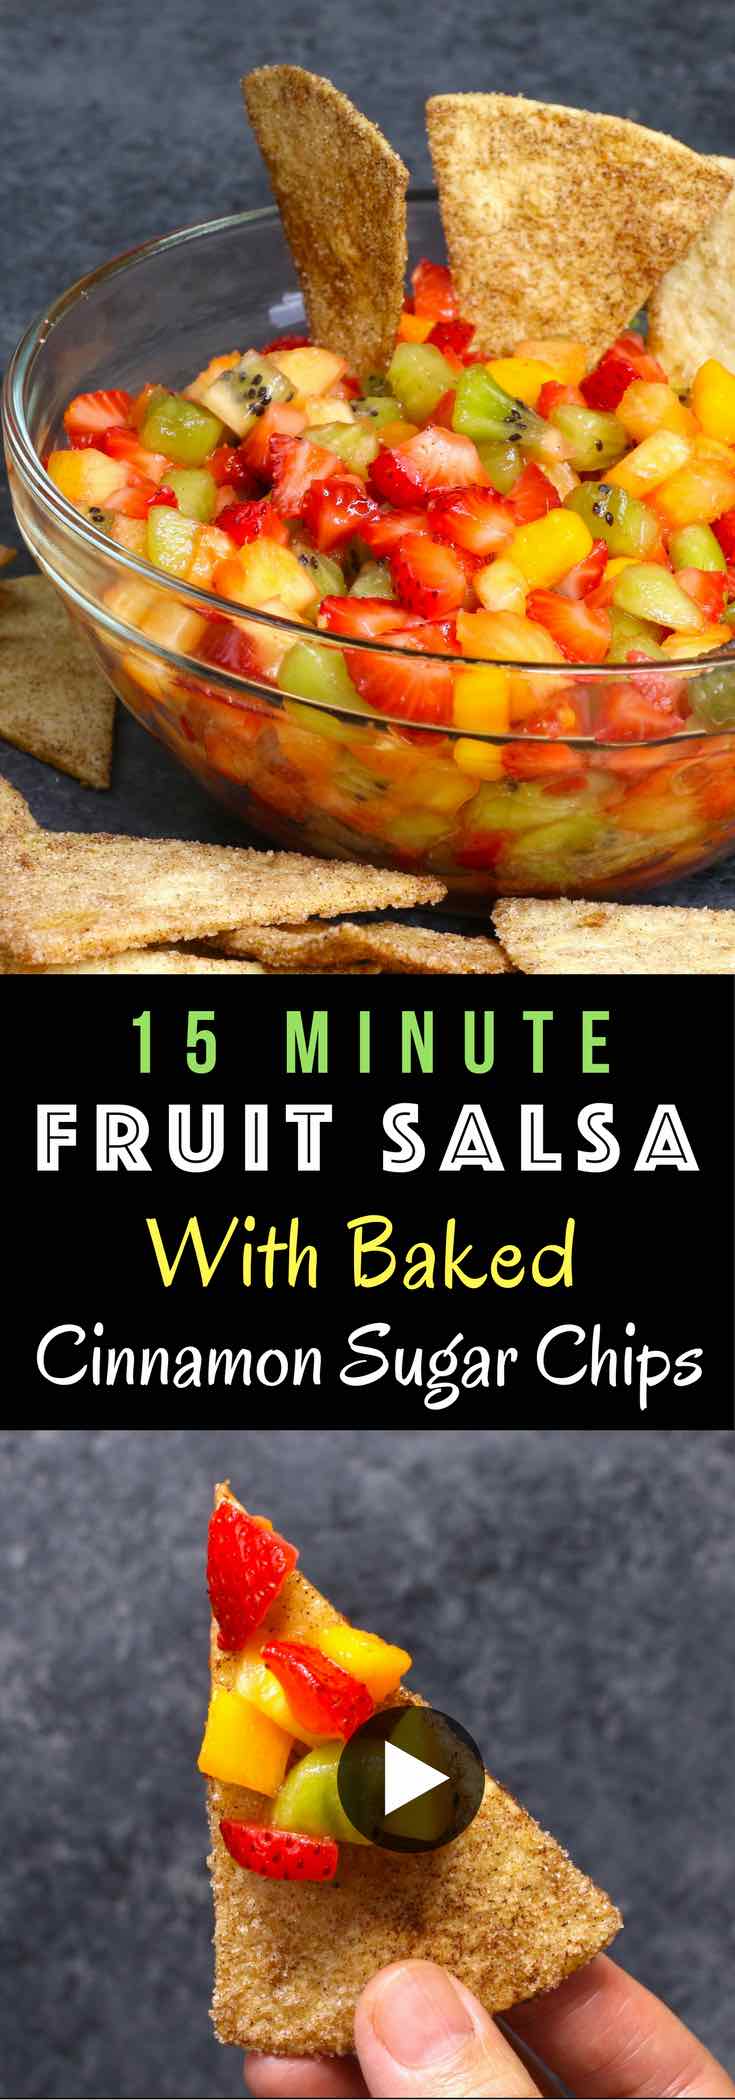 Fruit Salsa with Baked Cinnamon Chips - TipBuzz